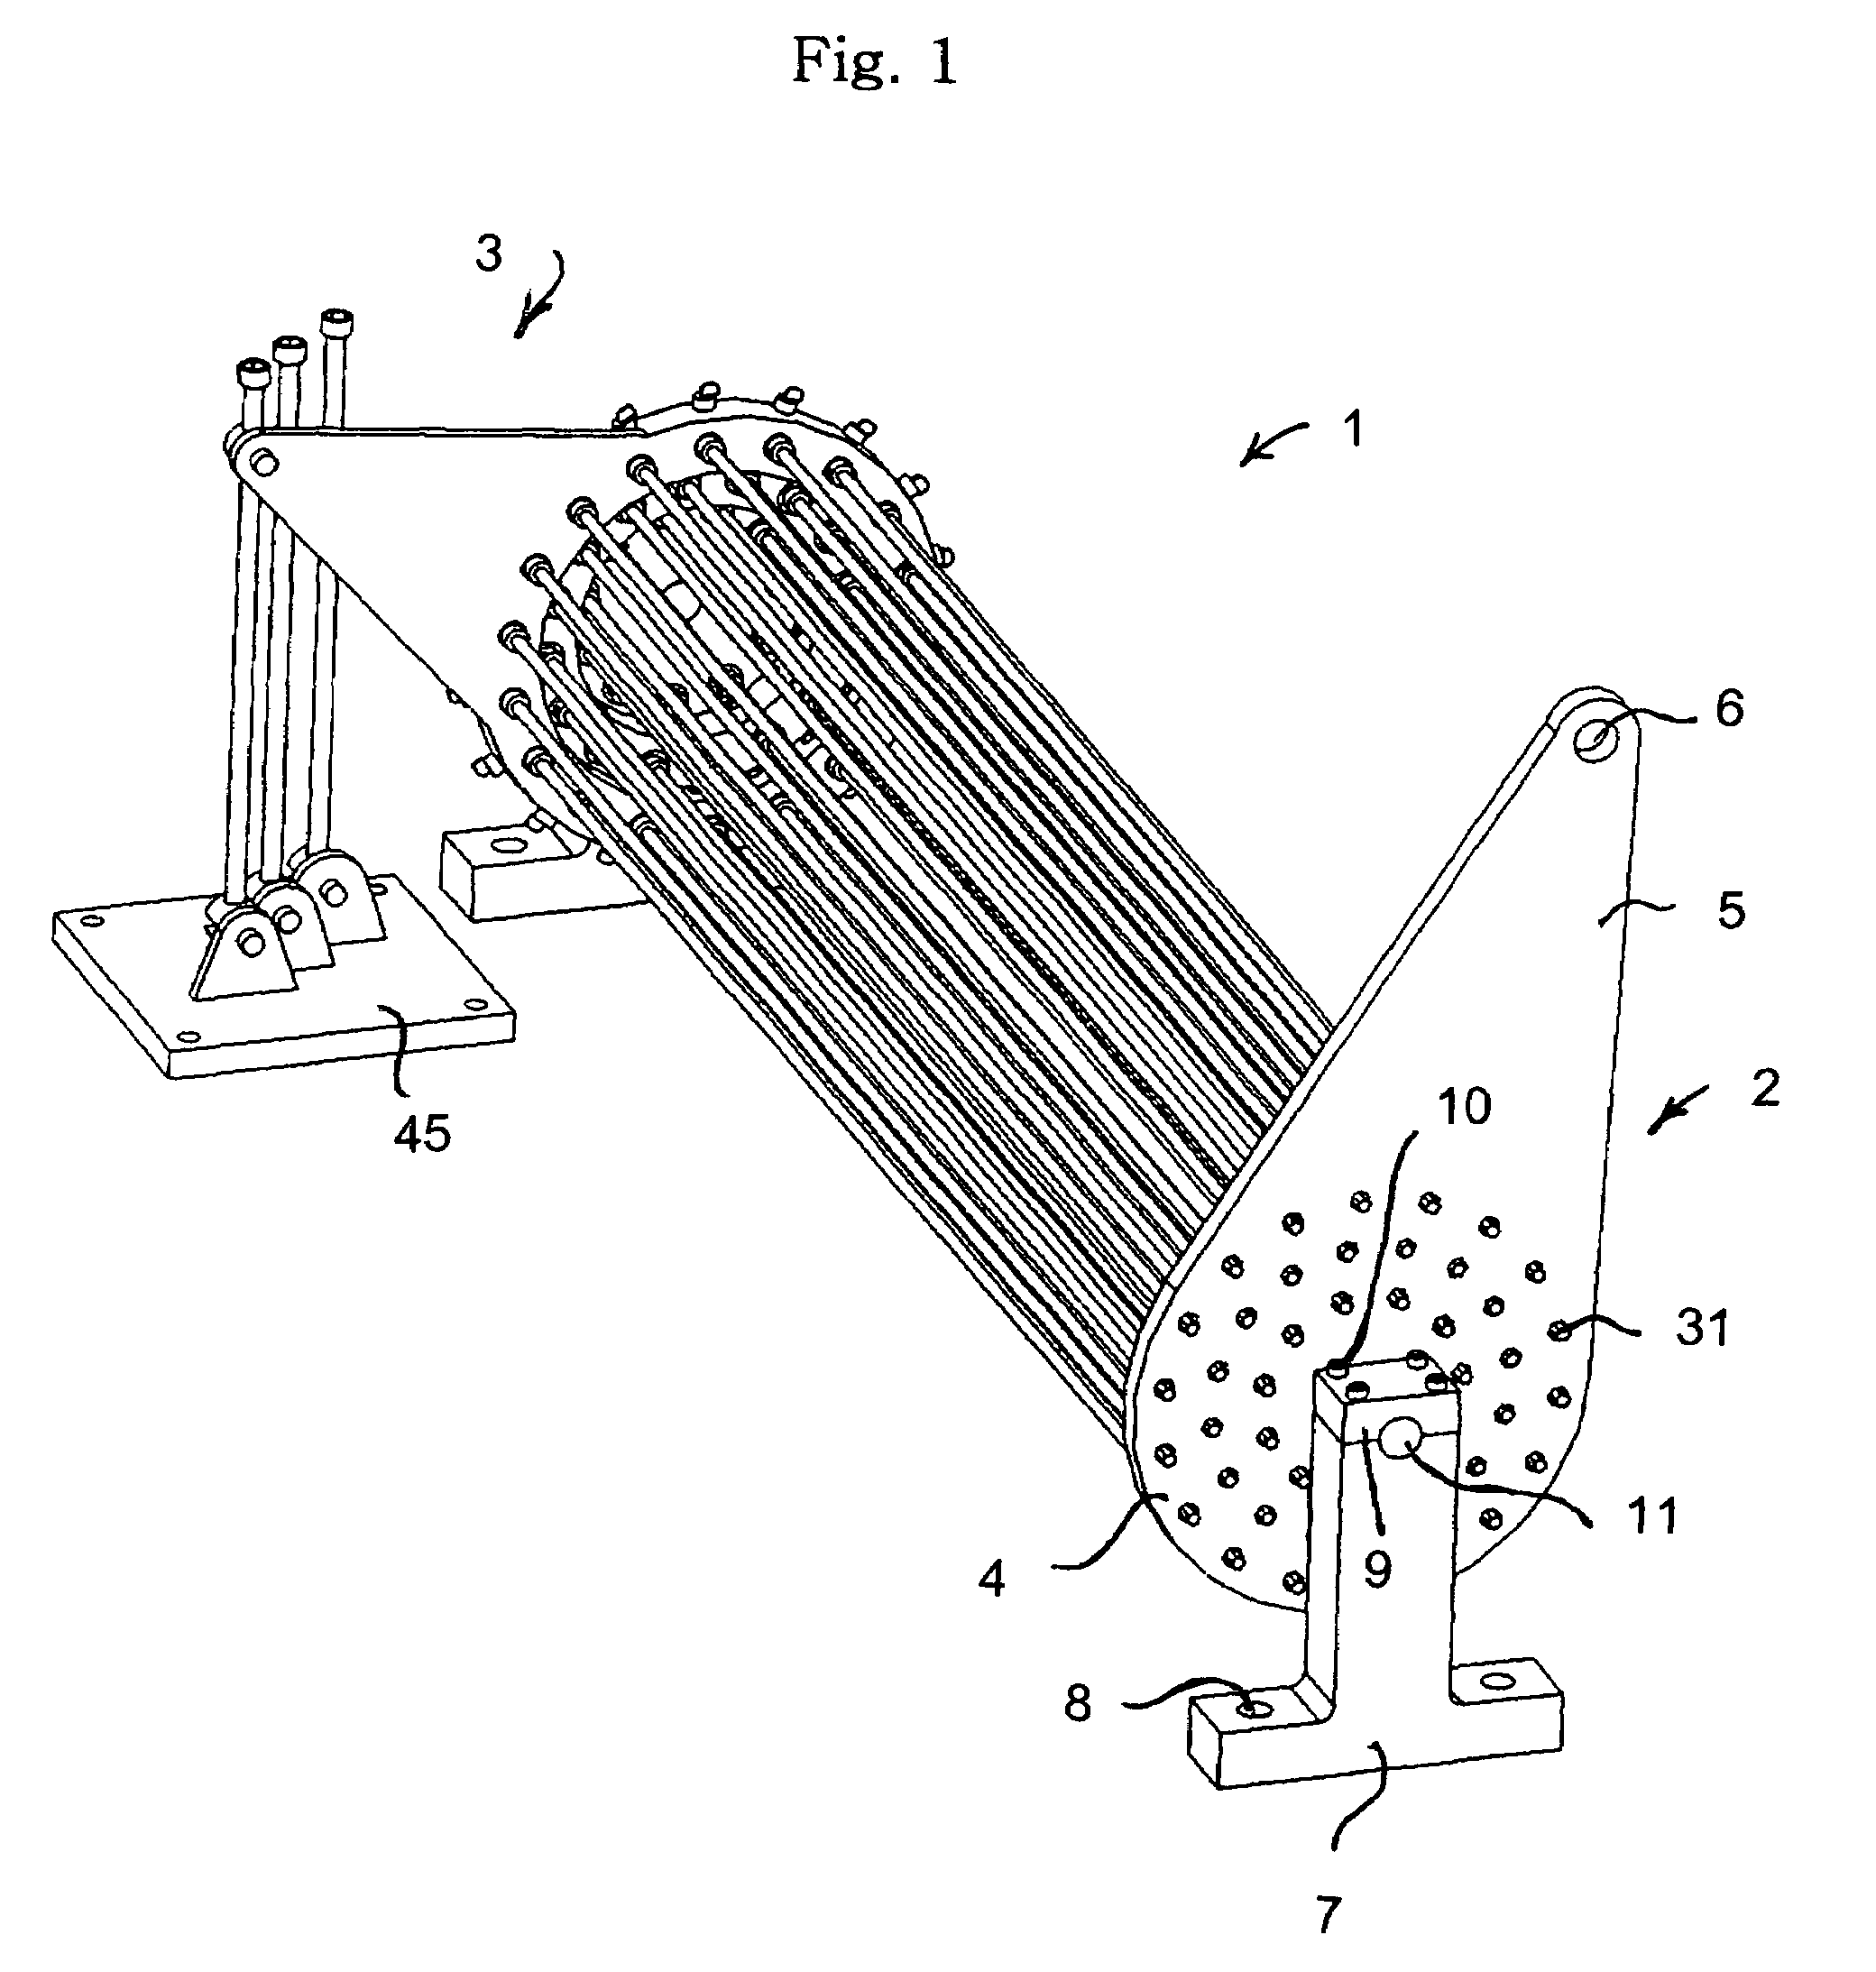 Non-helical torsion spring system